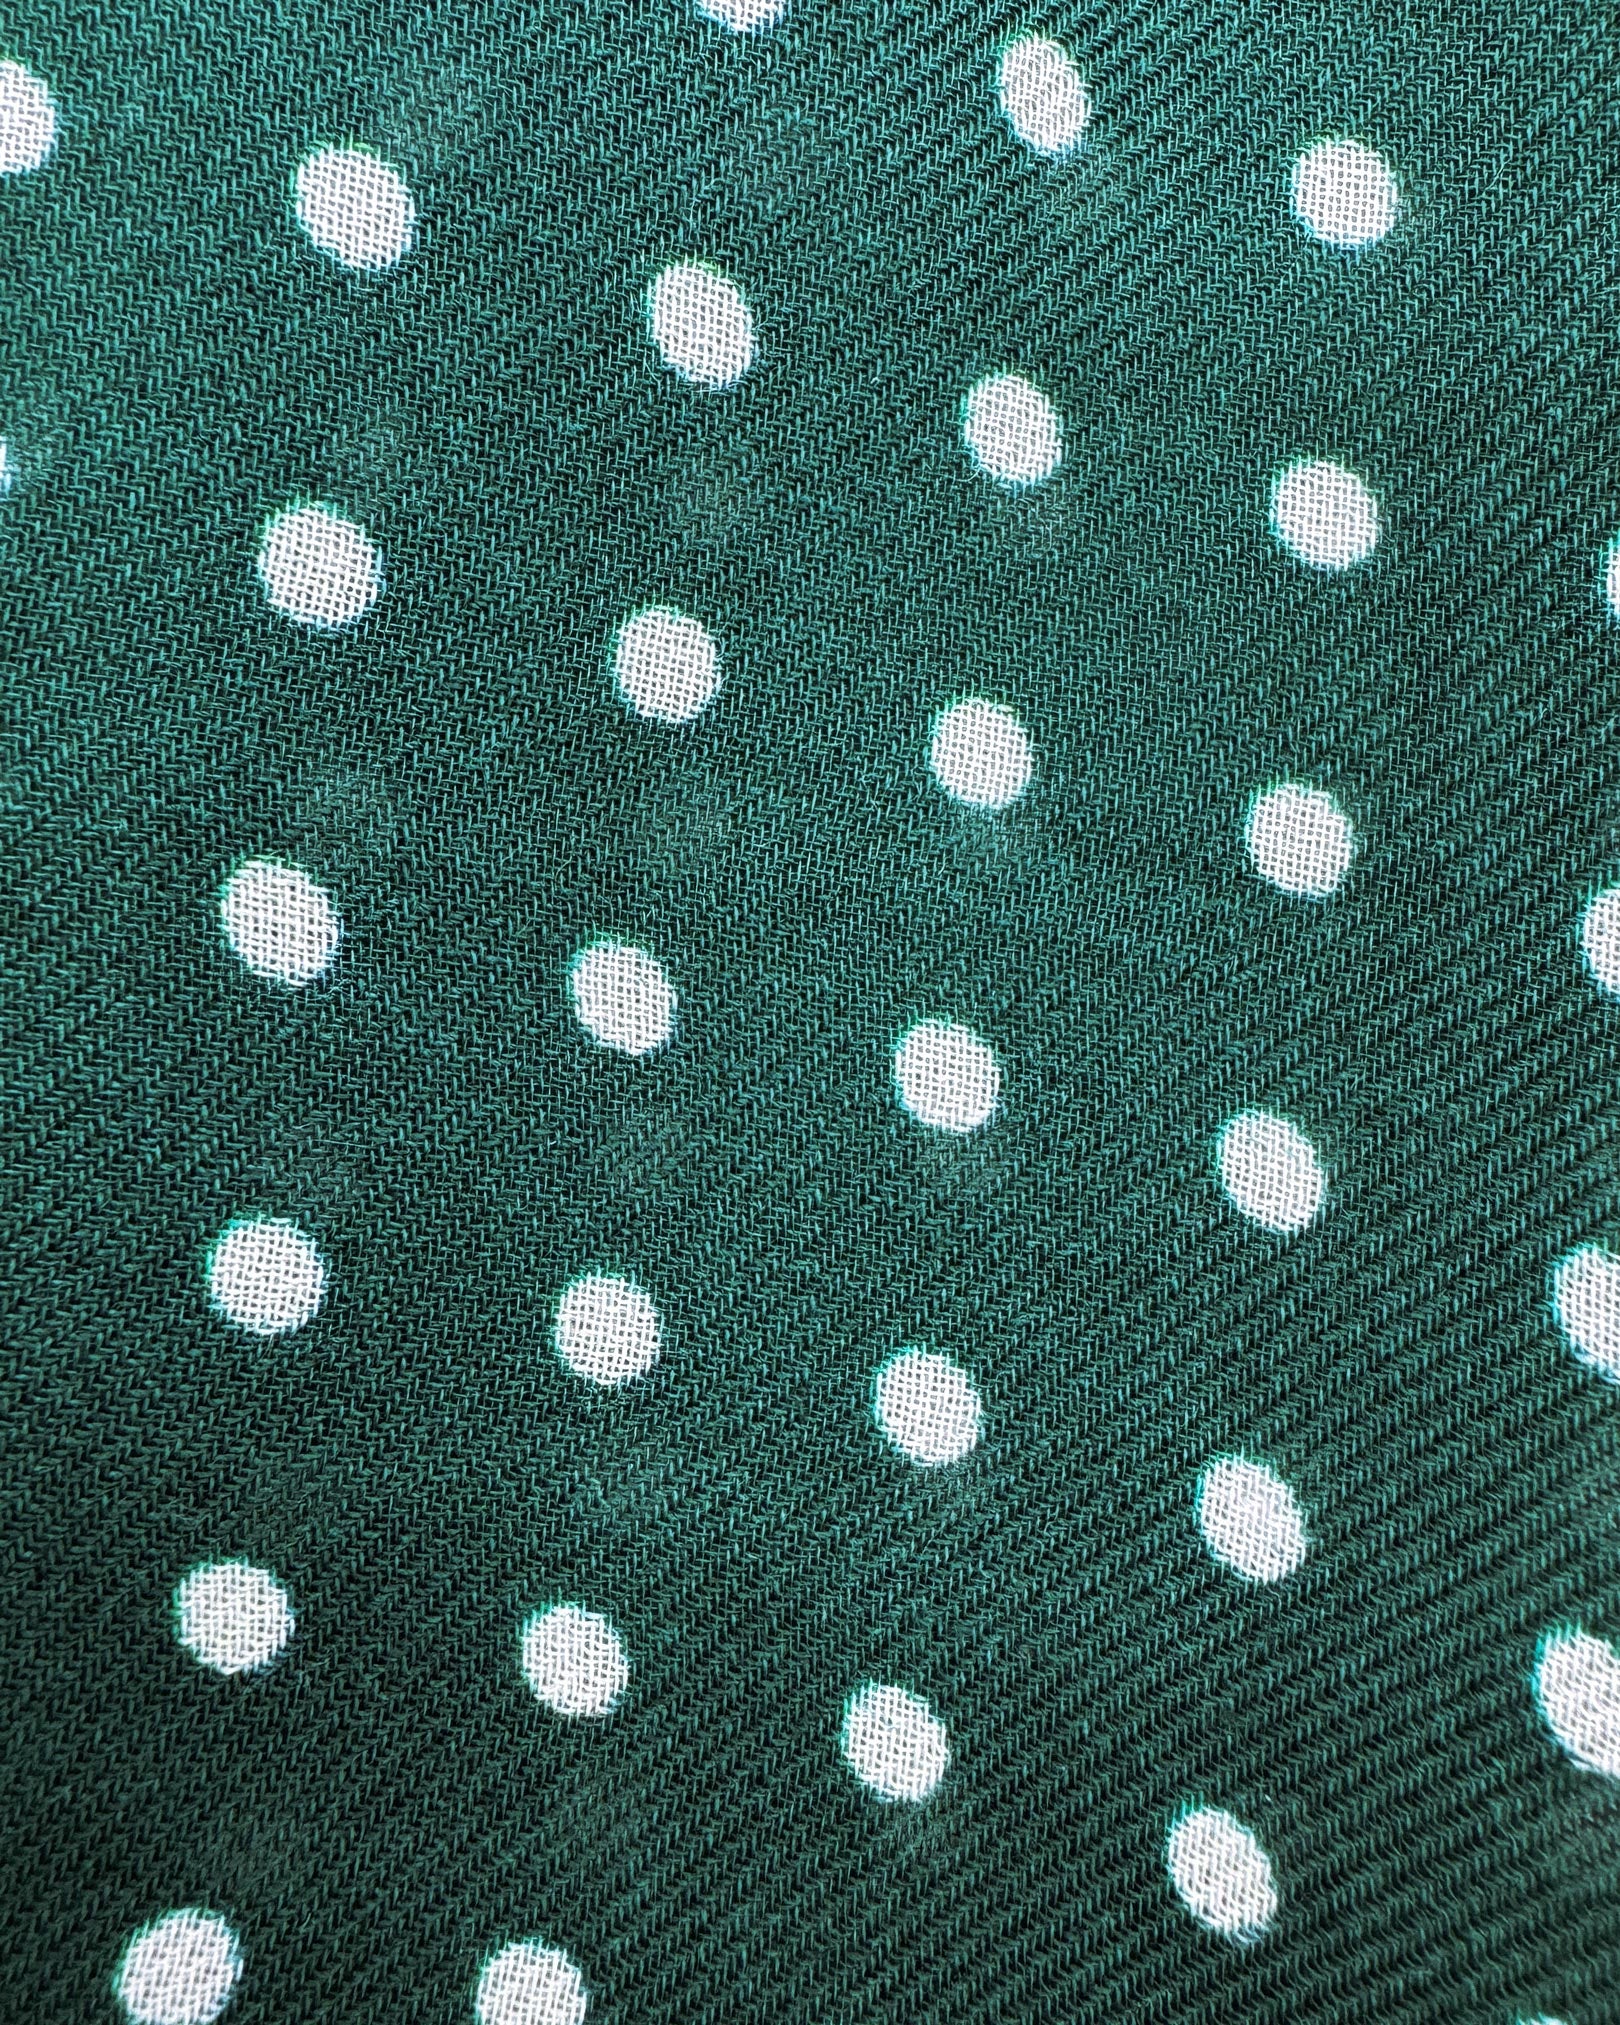 A flat, close up view of 'The Westminster RG' wide scarf. Clearly showing the modal and wool fabric and attractive white polka dot pattern against a racing green background.